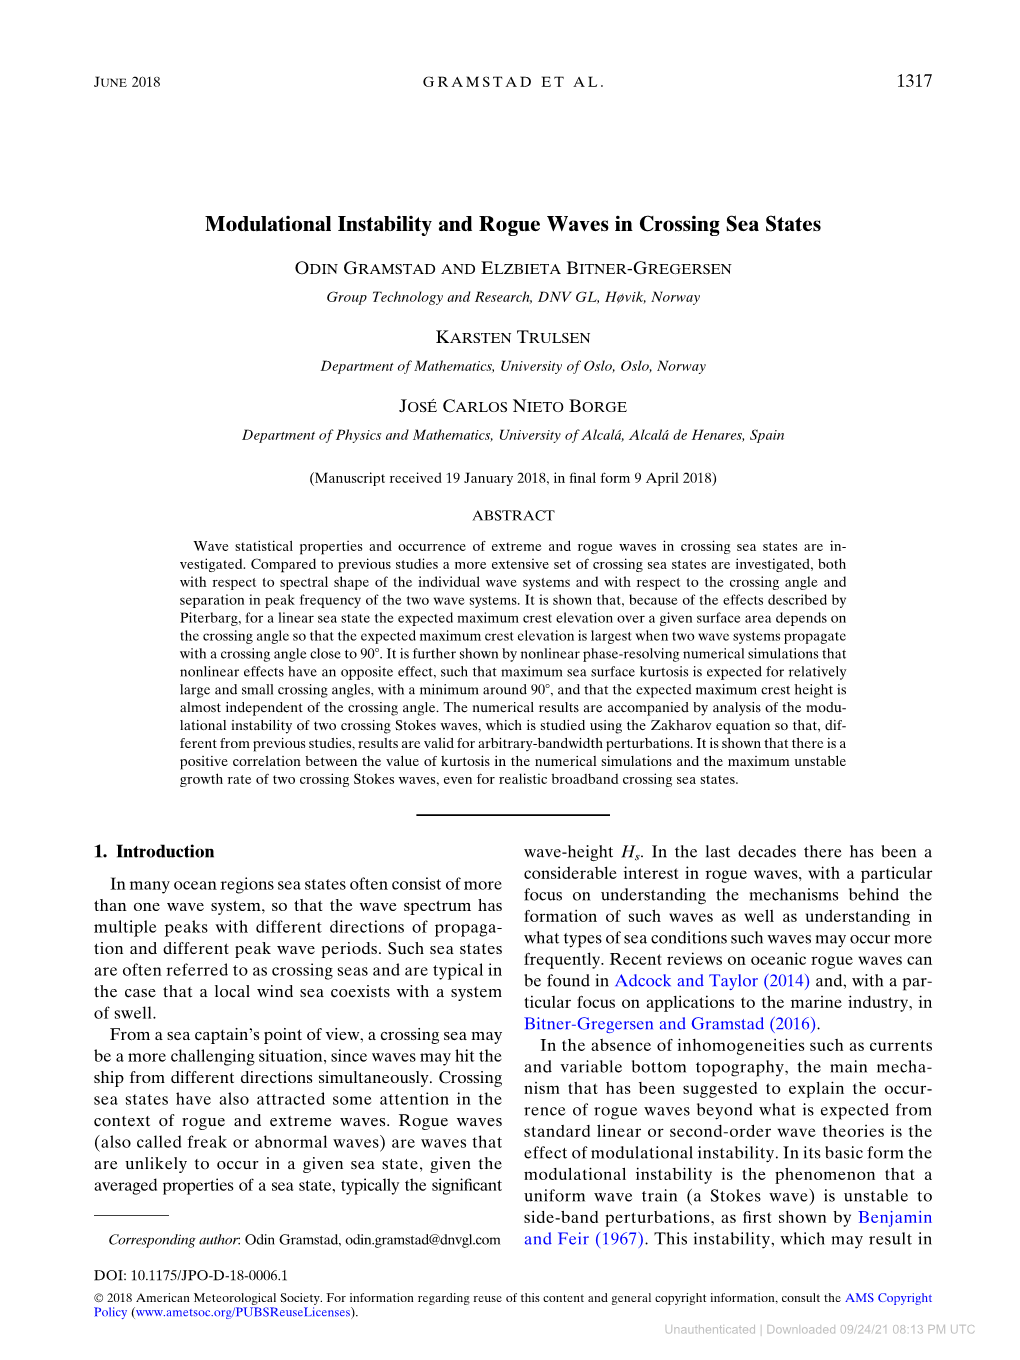 Modulational Instability and Rogue Waves in Crossing Sea States